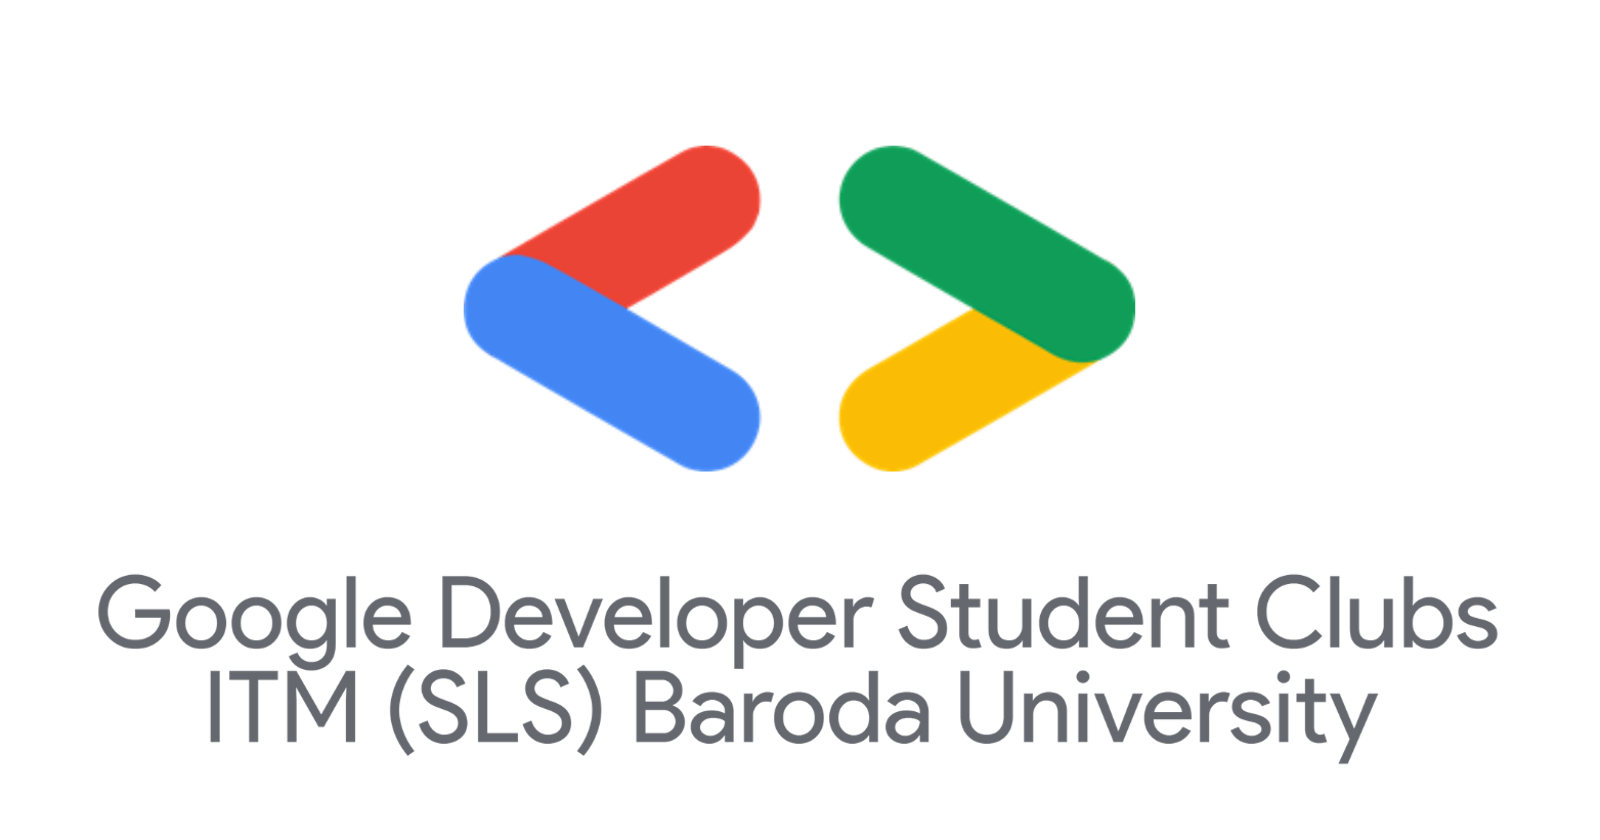 Journey to becoming a Google Developer Student Club Lead